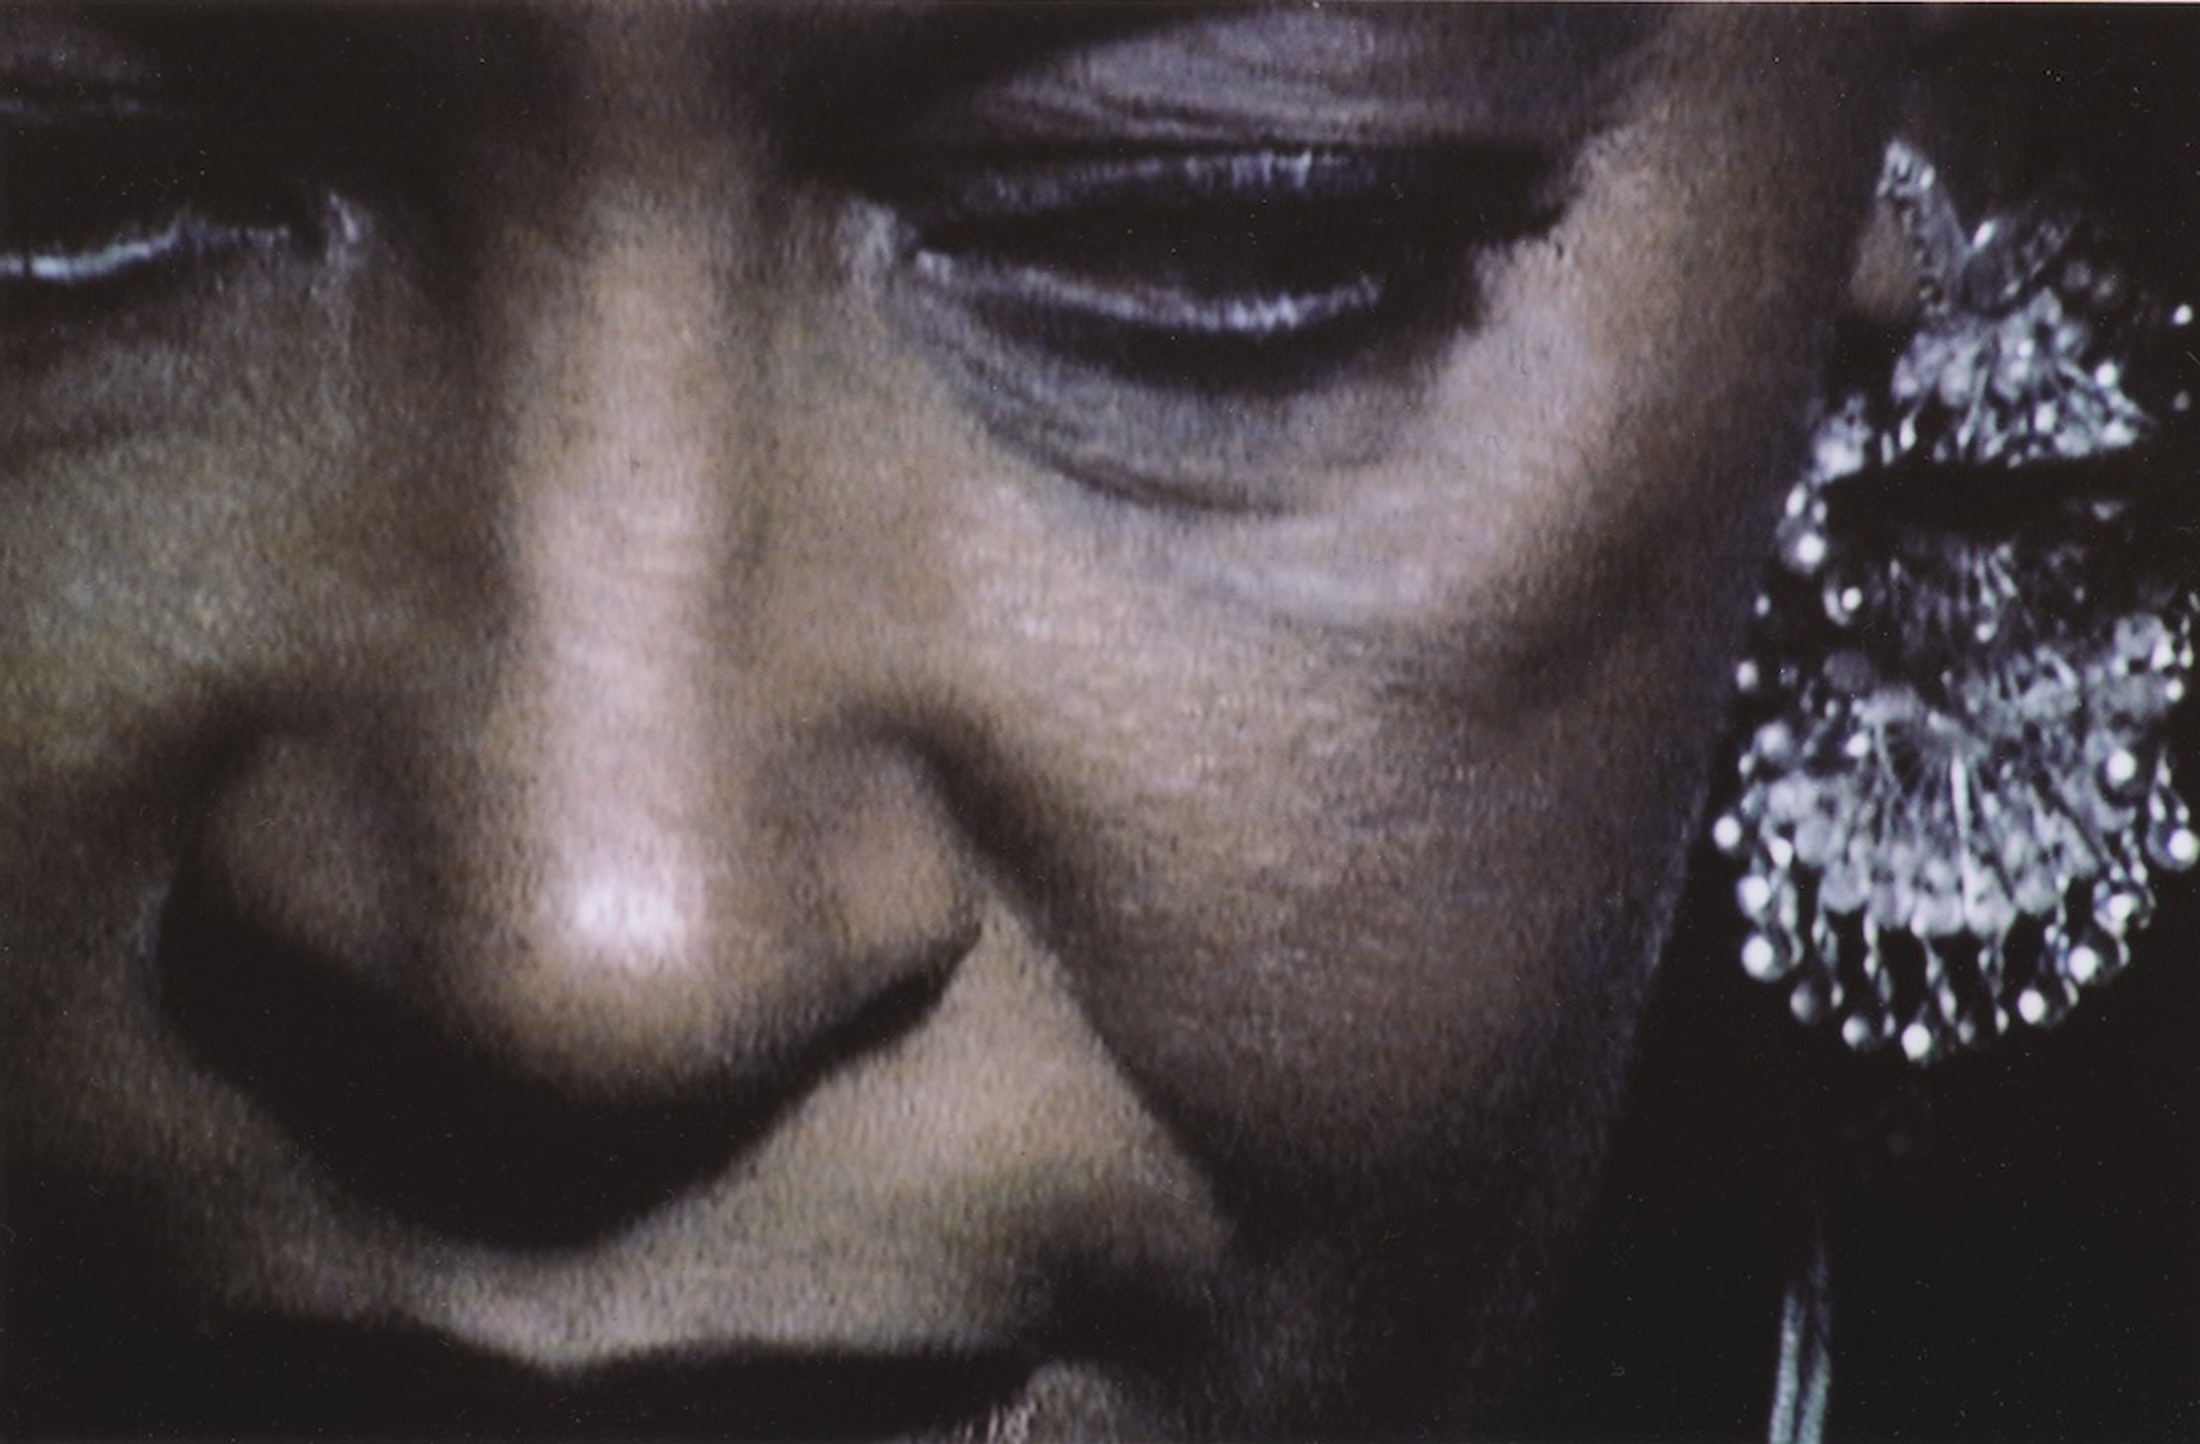 Carrie Mae Weems, Coming Up For Air, 2003 – 2004. Video. 51 Min, 34 sec. © Carrie Mae Weems. Courtesy of the artist and Jack Shainman Gallery, New York. The Eileen Harris Norton Collection. Photo: Charles White.